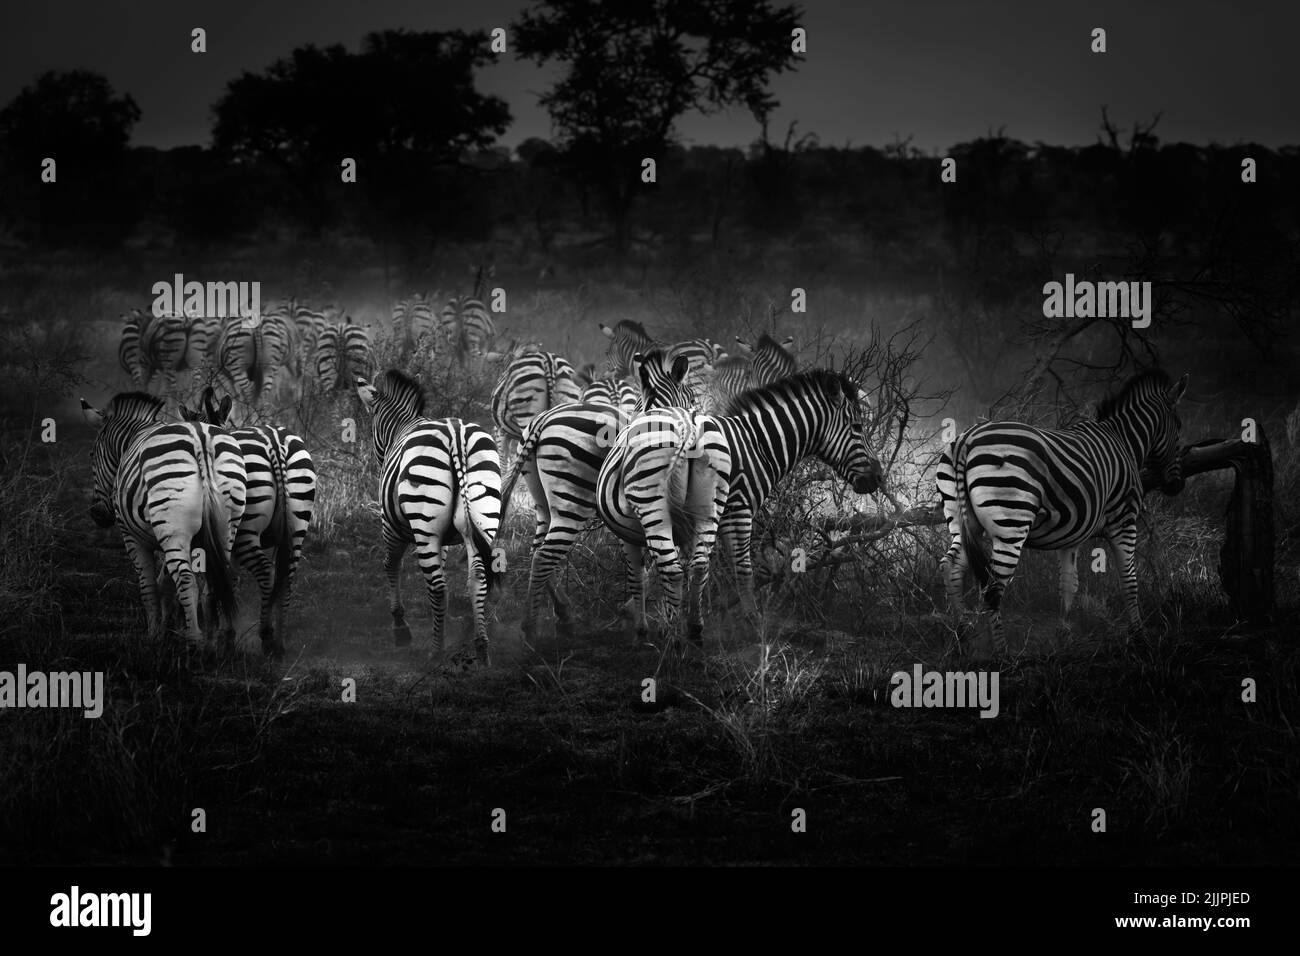 Herd of Zebras walking through a recently burned area of African veld- black and white image Stock Photo